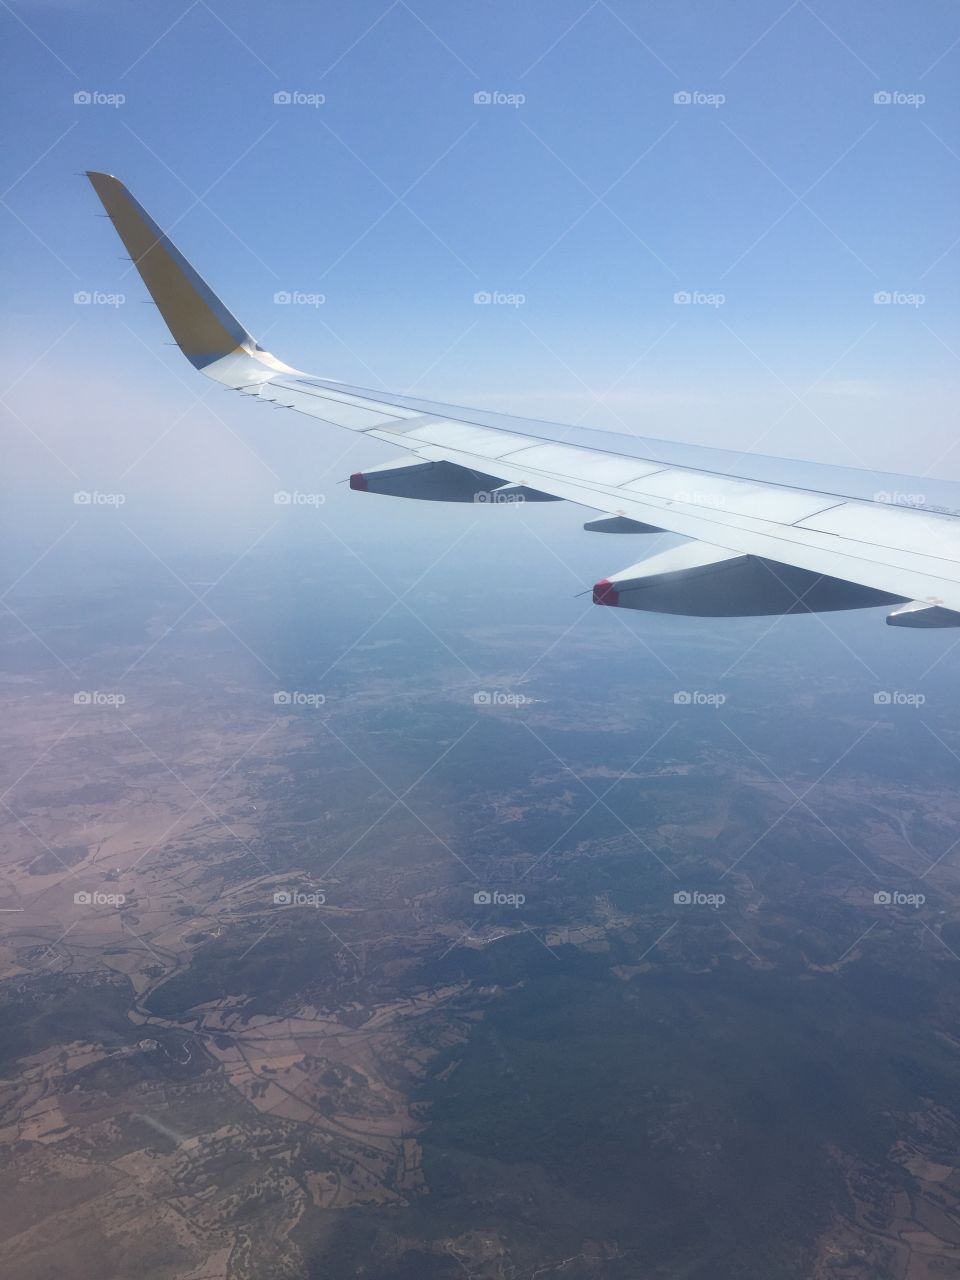 I’m on top of the world ayyye.. sun reflecting off wings on plane. Spain sits 6000 feet below, on way to. Whole new world 